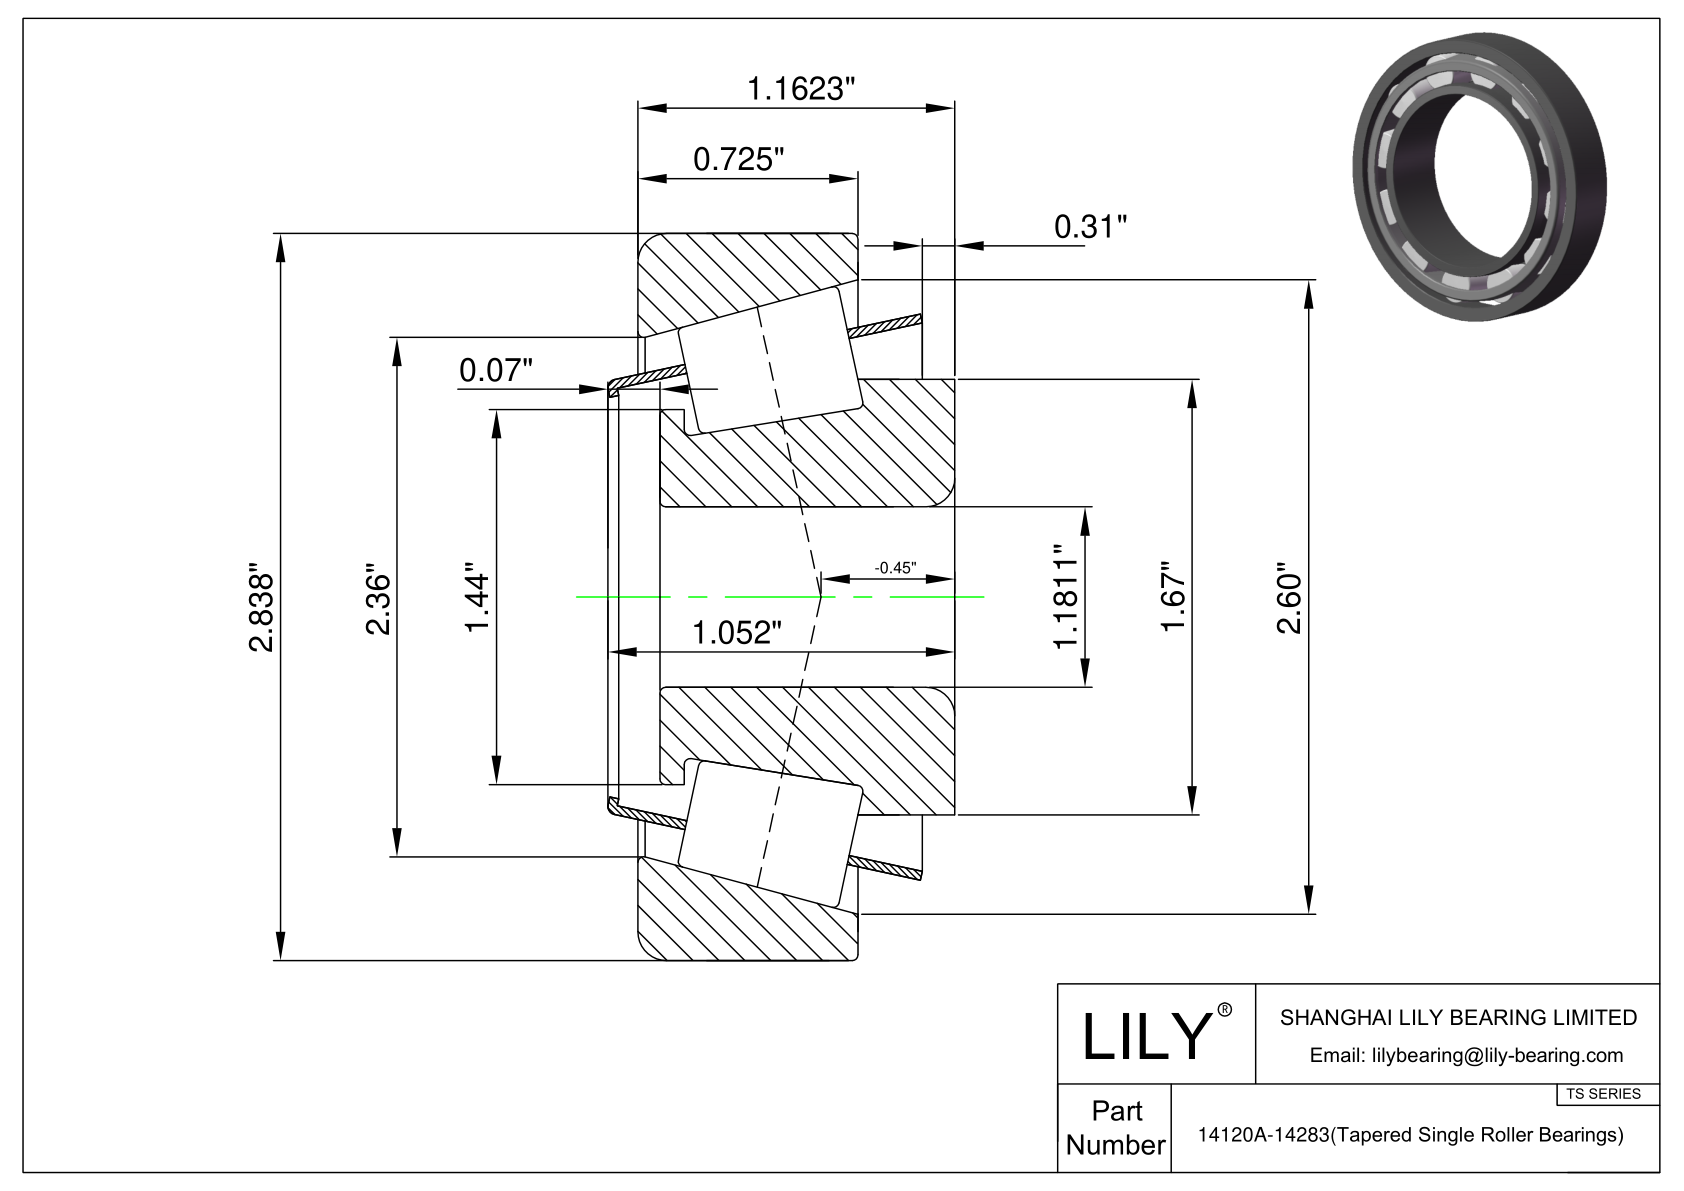 14120A-14283 TS (Tapered Single Roller Bearings) (Imperial) cad drawing